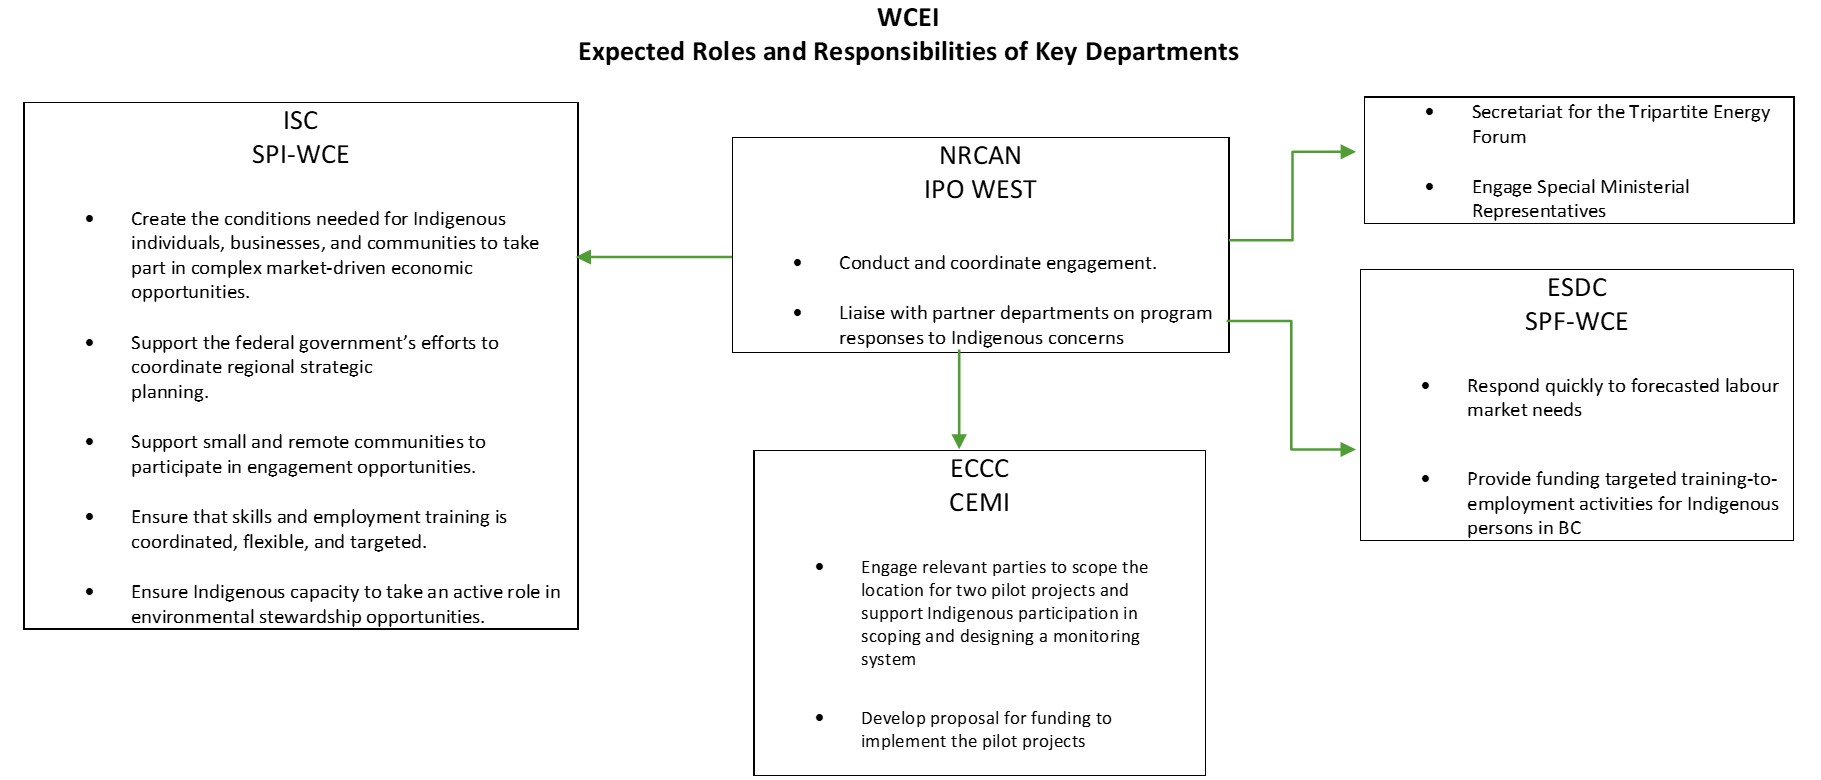 WCEI Expected Roles and Responsibilities of Key Departments